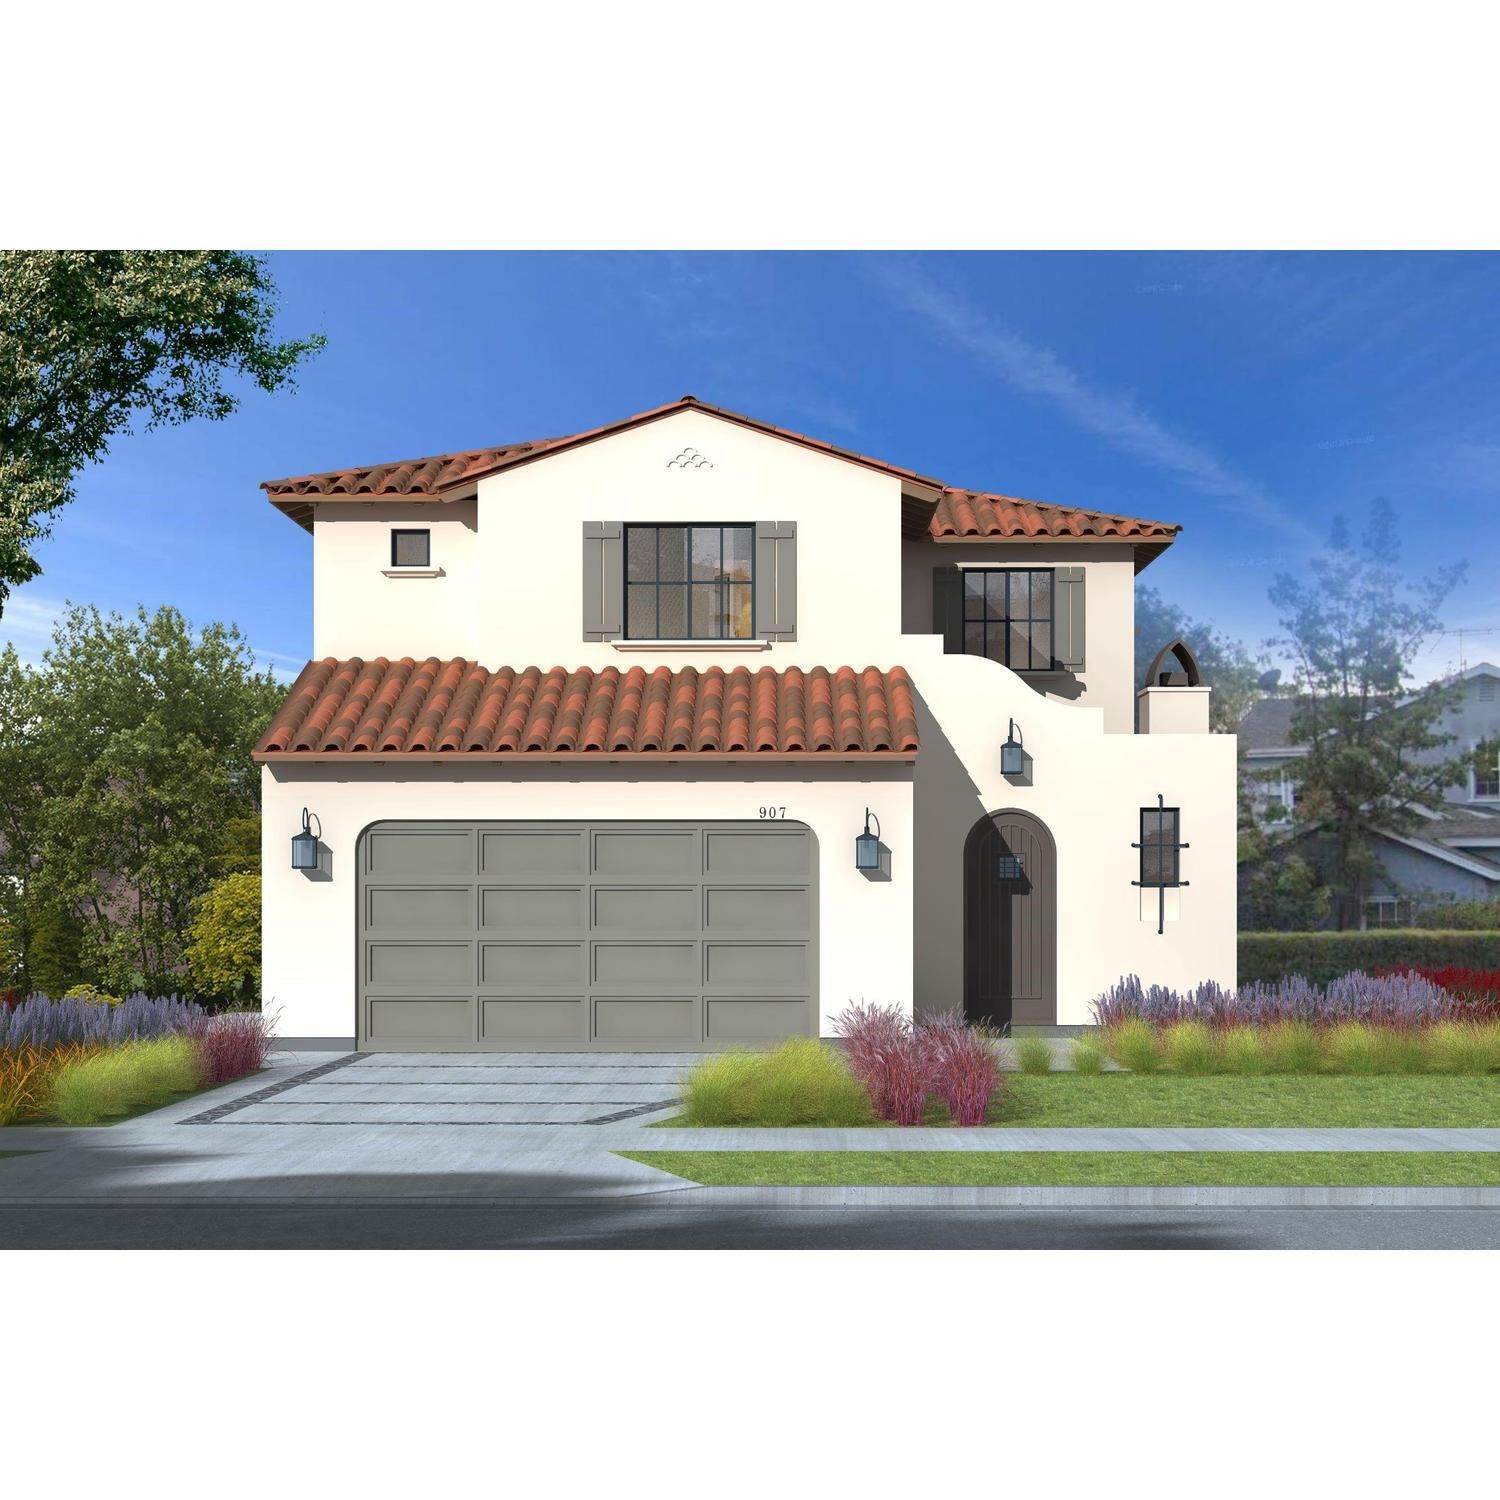 Single Family for Sale at Socal- Build On Your Homesite - The Elm Collection CULVER CITY, CALIFORNIA 90232 UNITED STATES